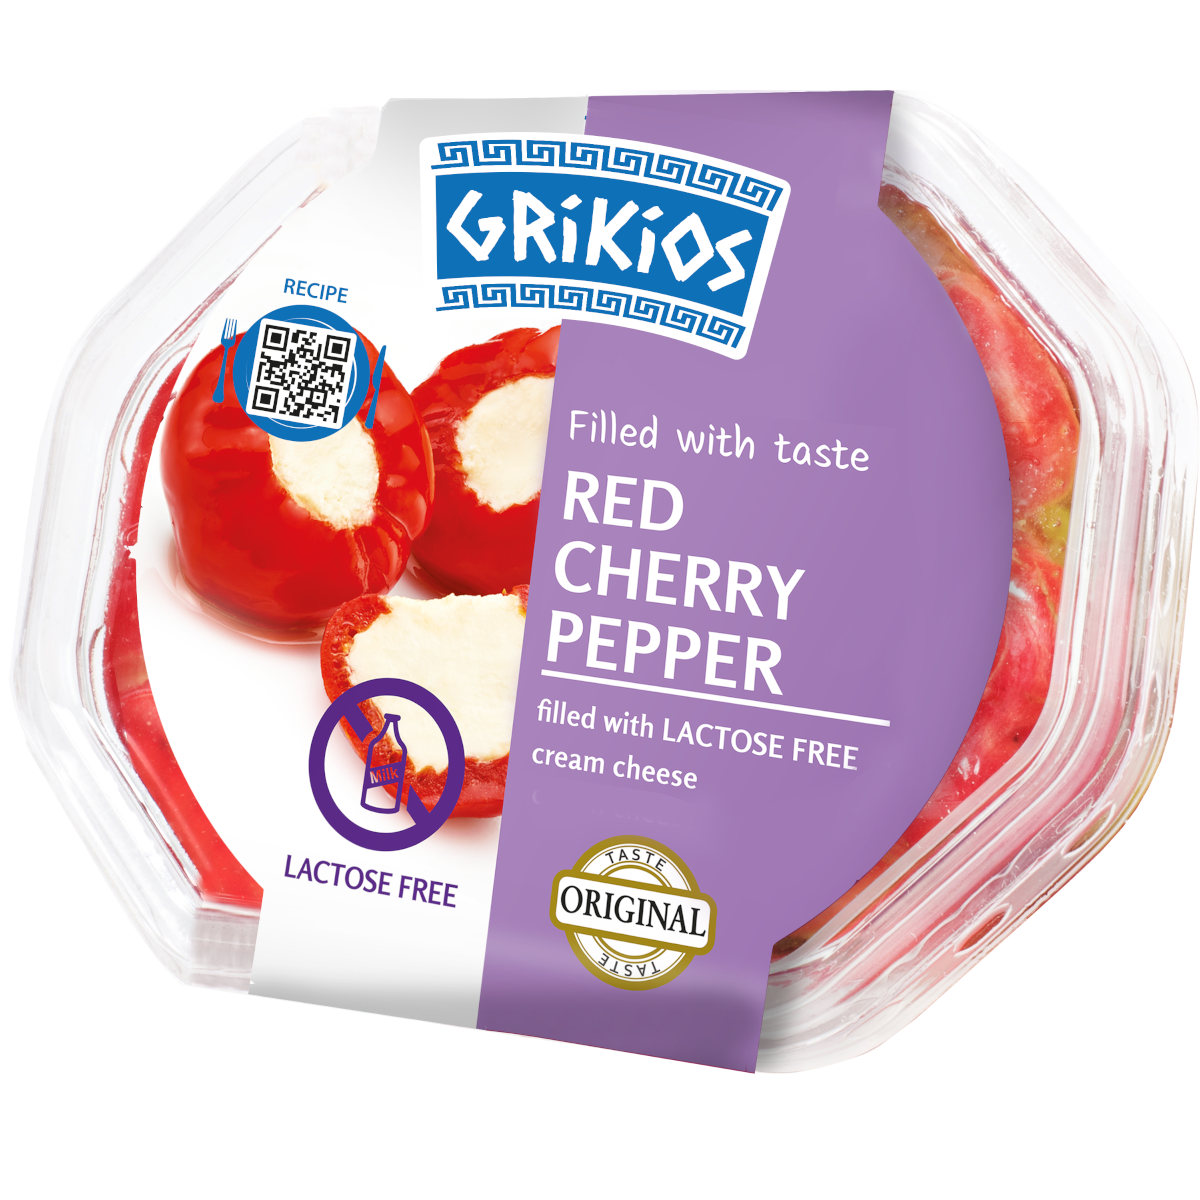 Grikios Red cherry pepper filled with cheese lactose free